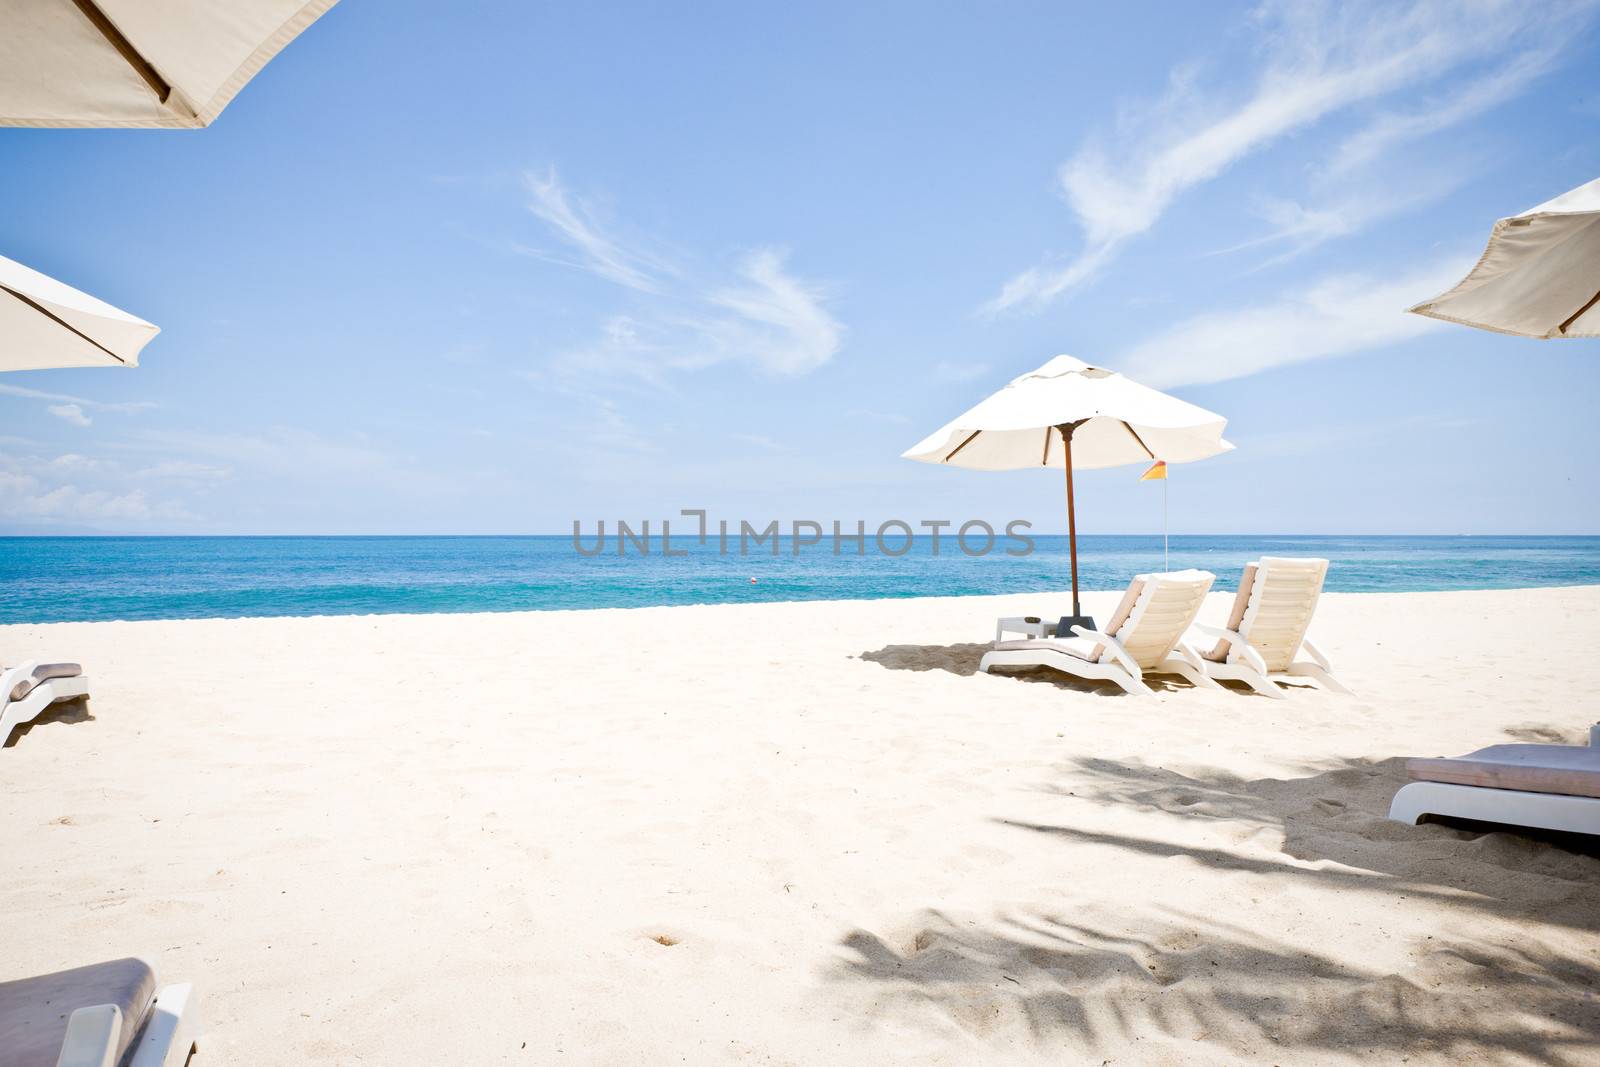 White sand, the ocean and umbrellas with beach chairs